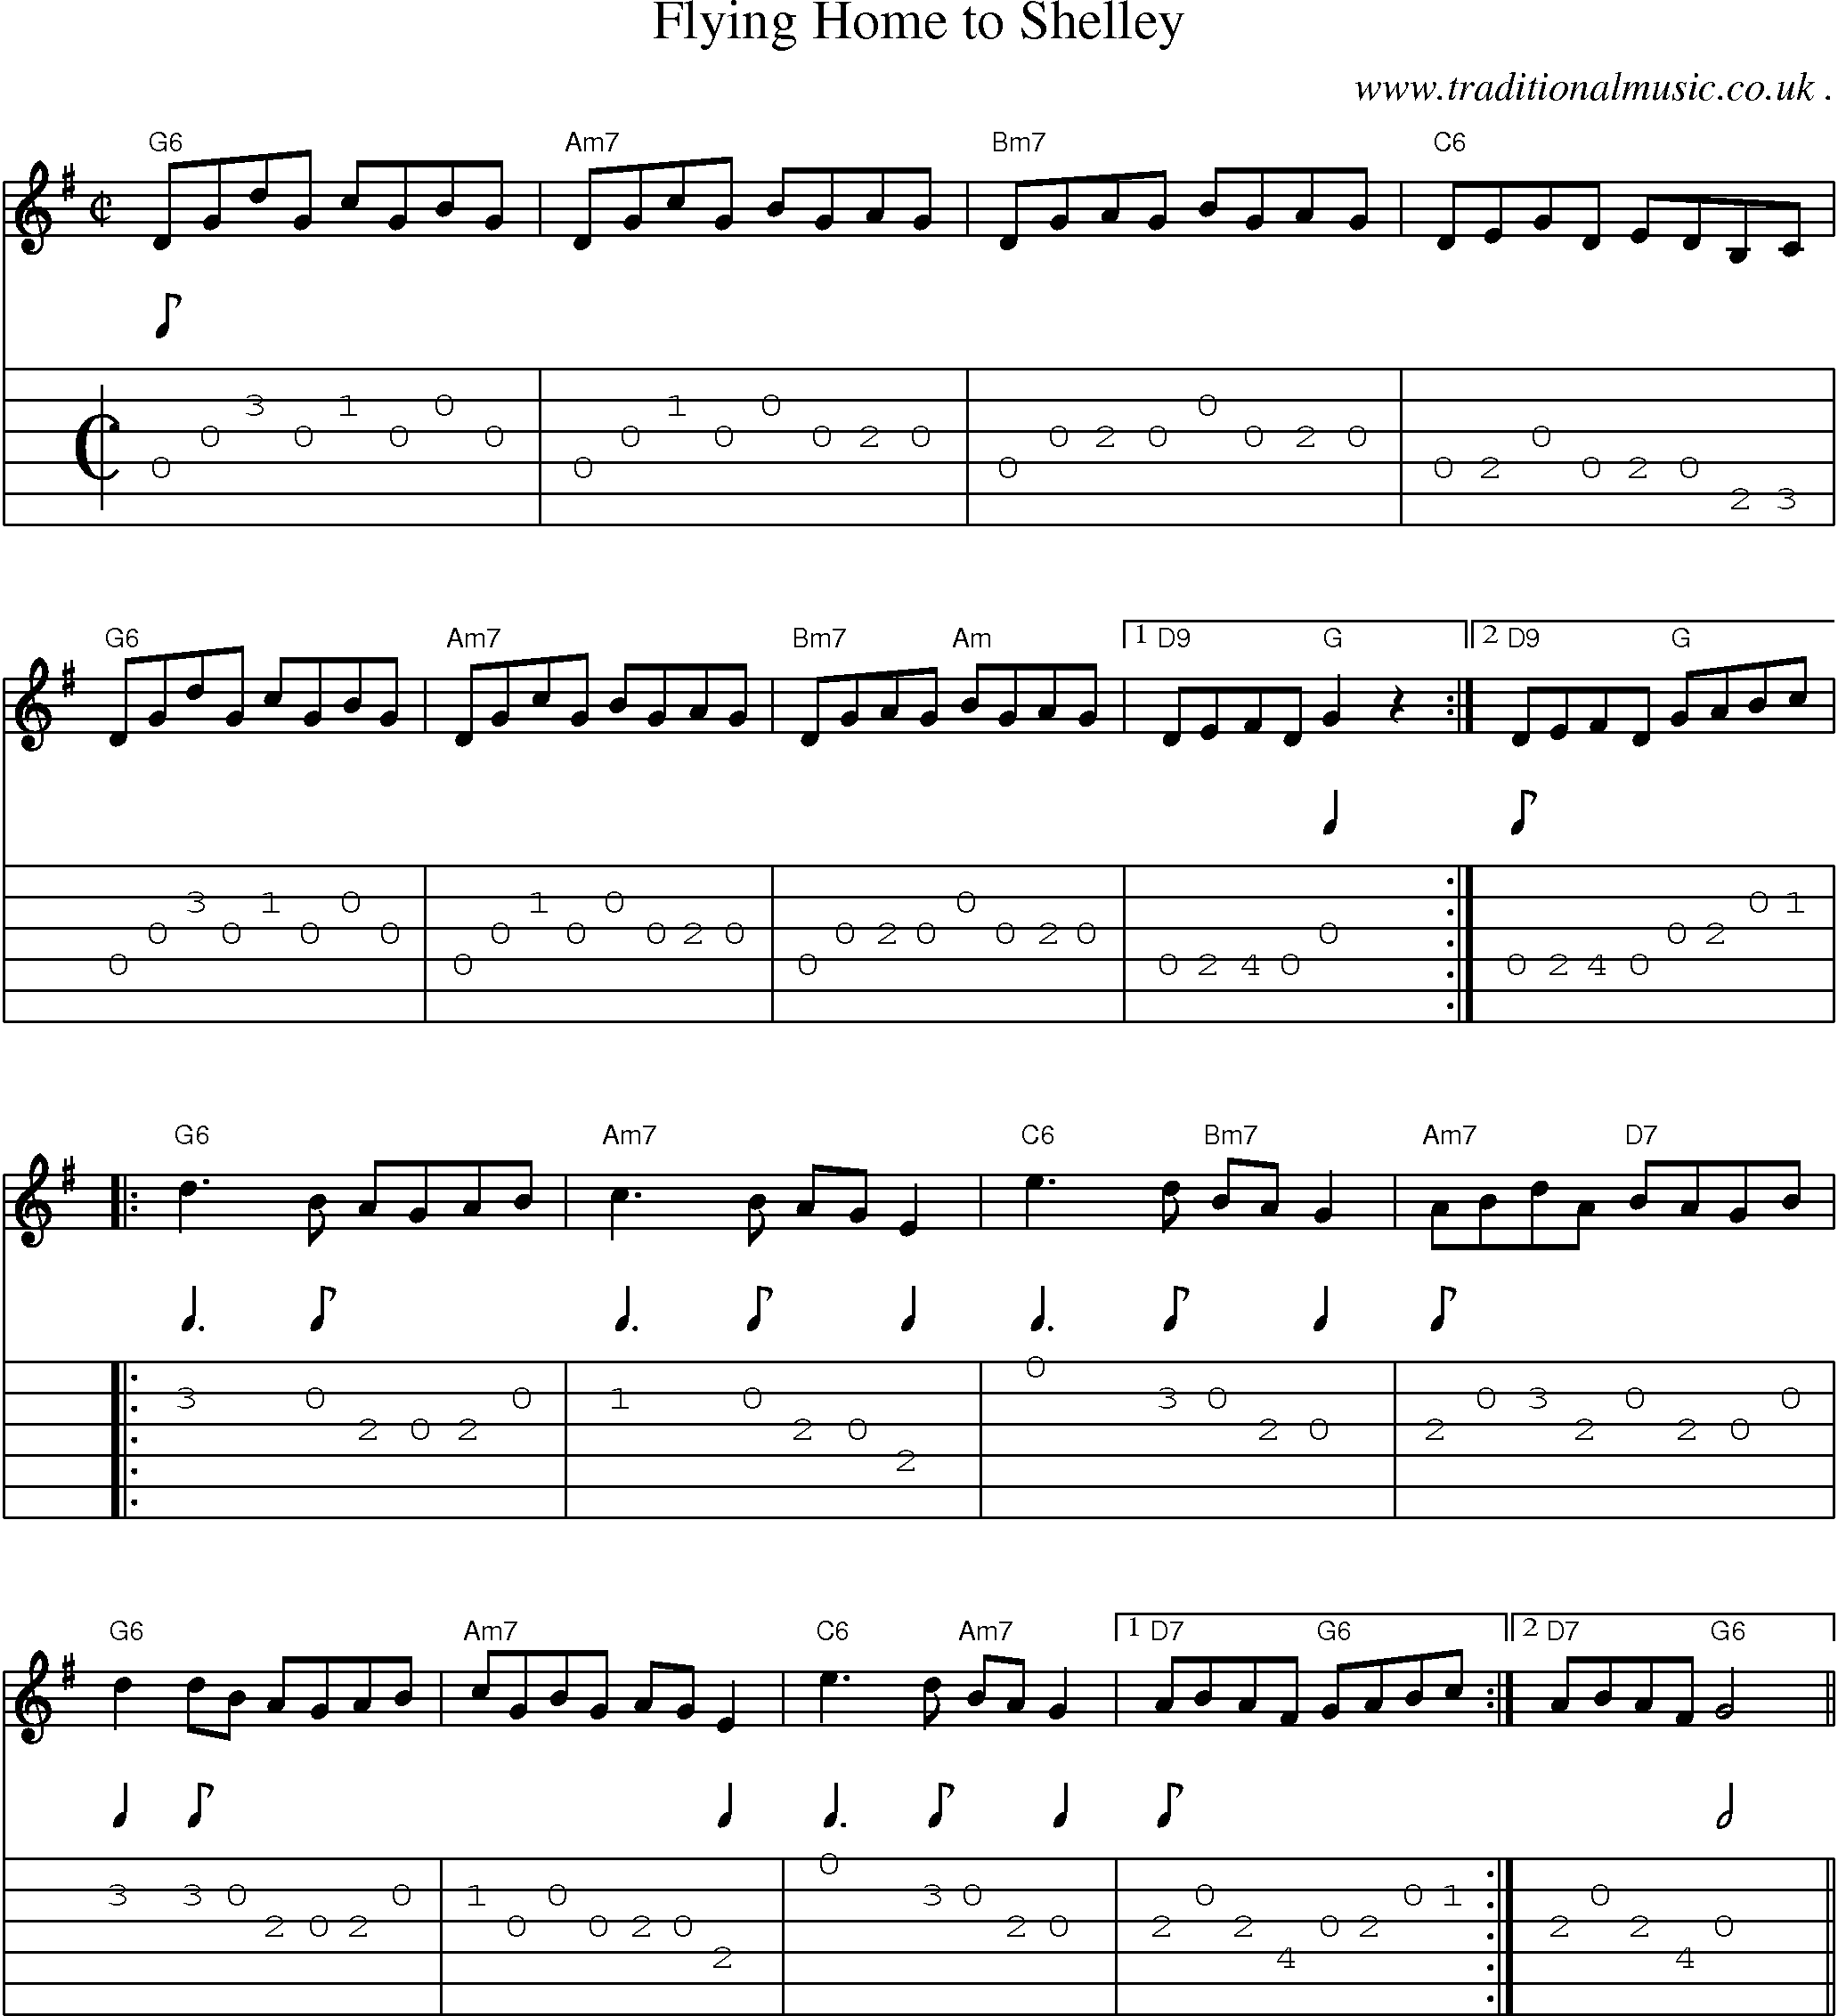 Music Score and Guitar Tabs for Flying Home To Shelley